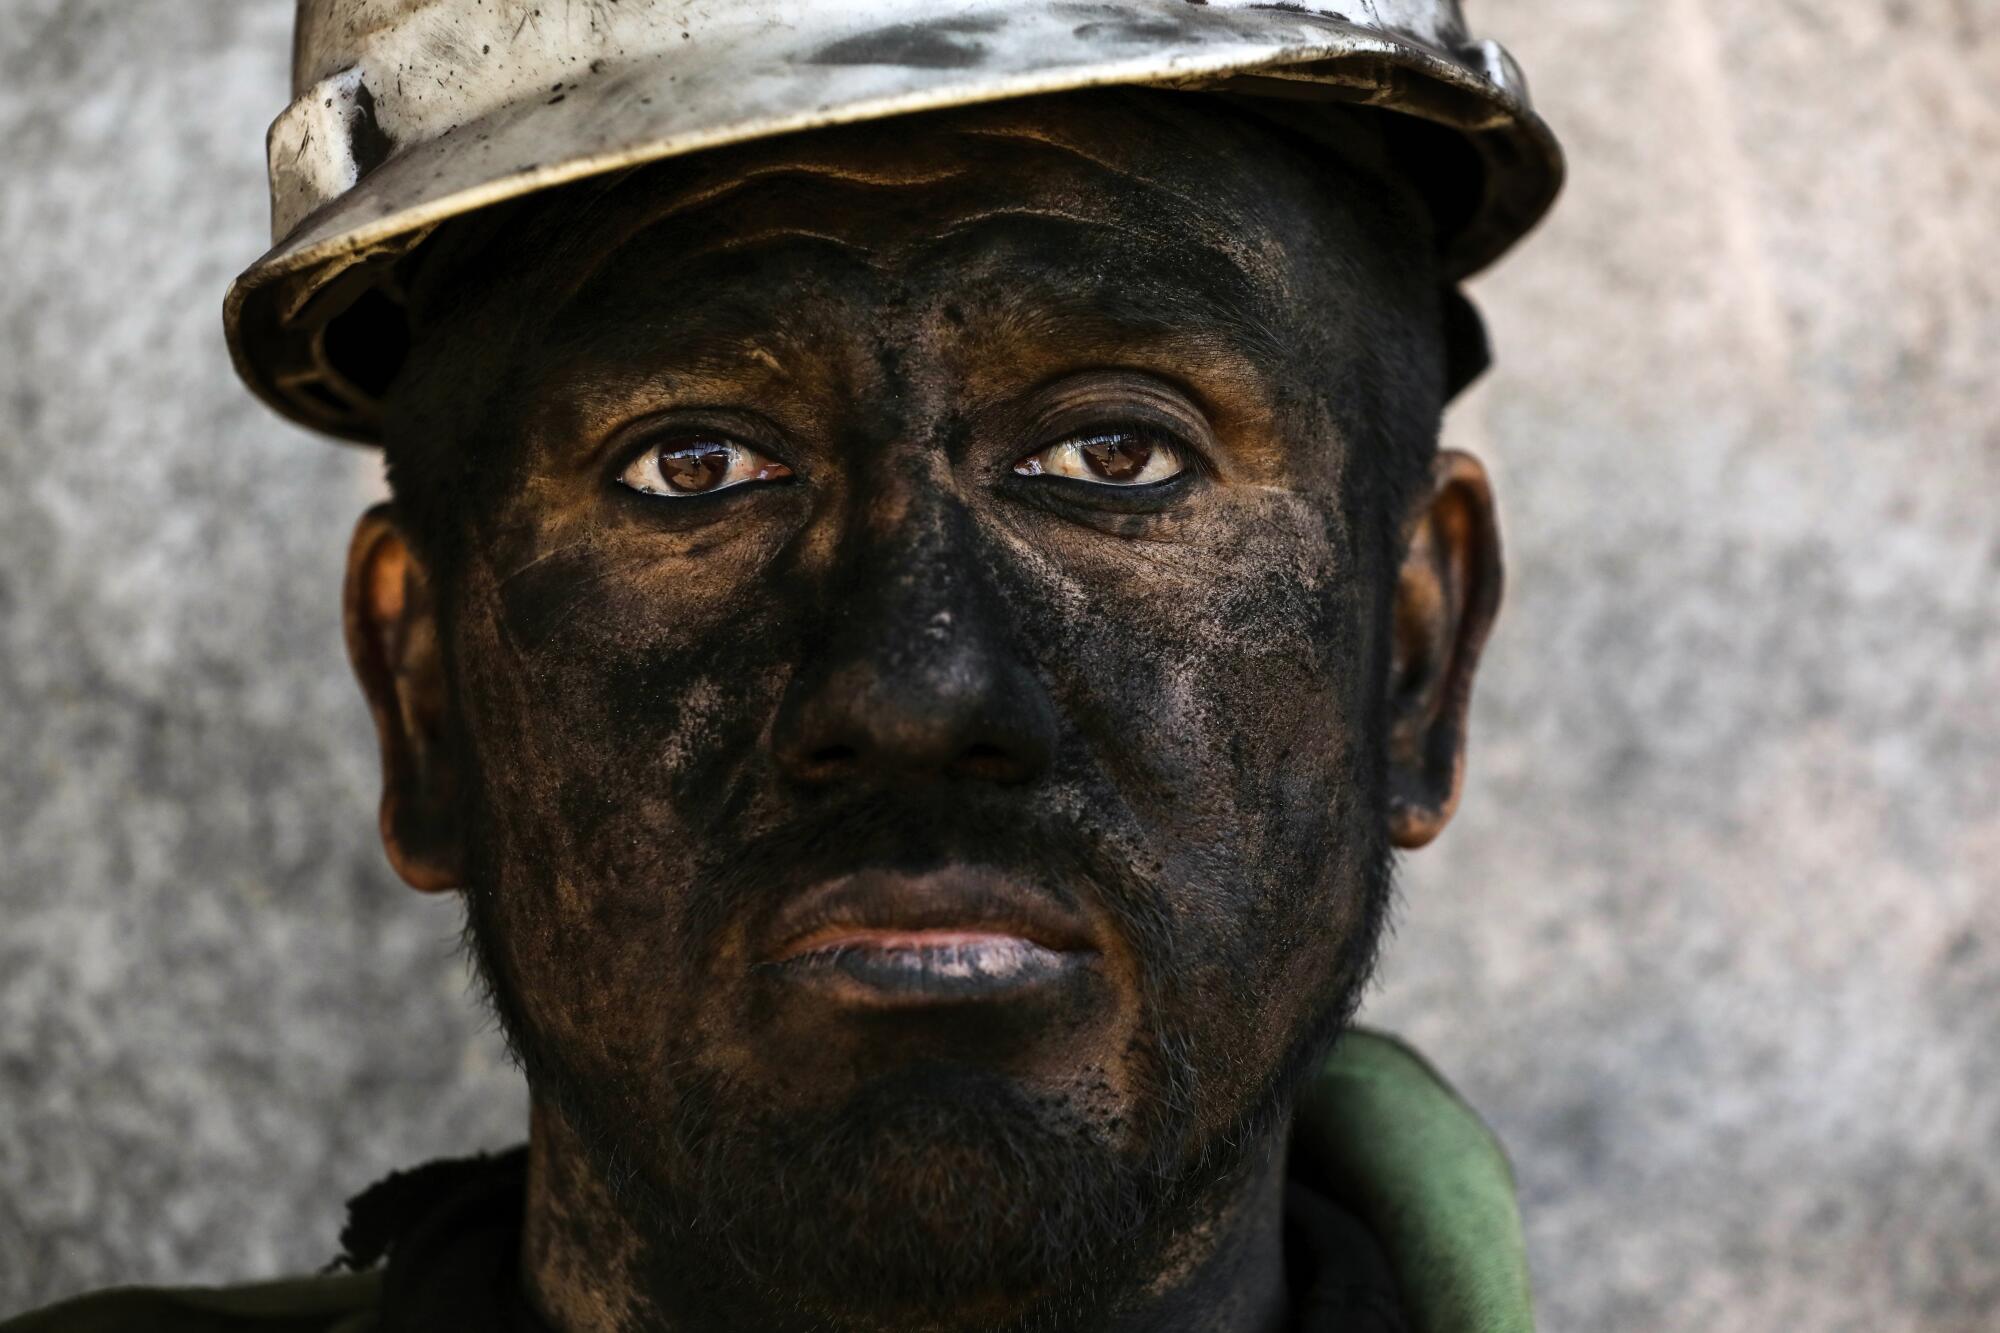 Miner Javier Cardenas, 37, after coming to the surface after mining for metallurgical coal in Progreso, Coahuila.